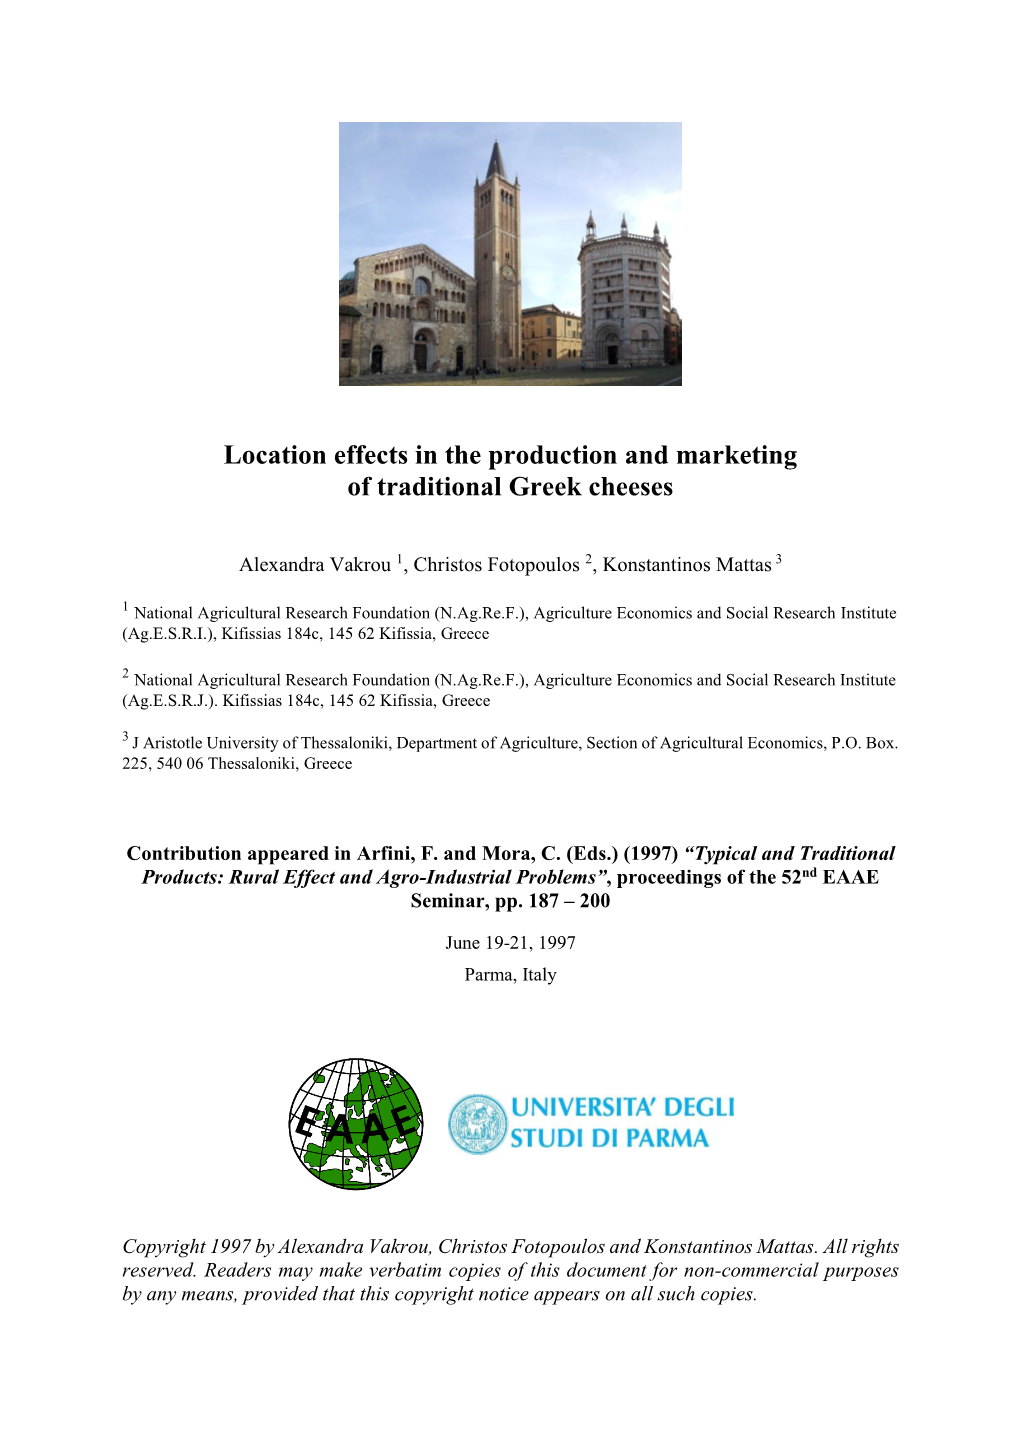 Location Effects in the Production and Marketing of Traditional Greek Cheeses